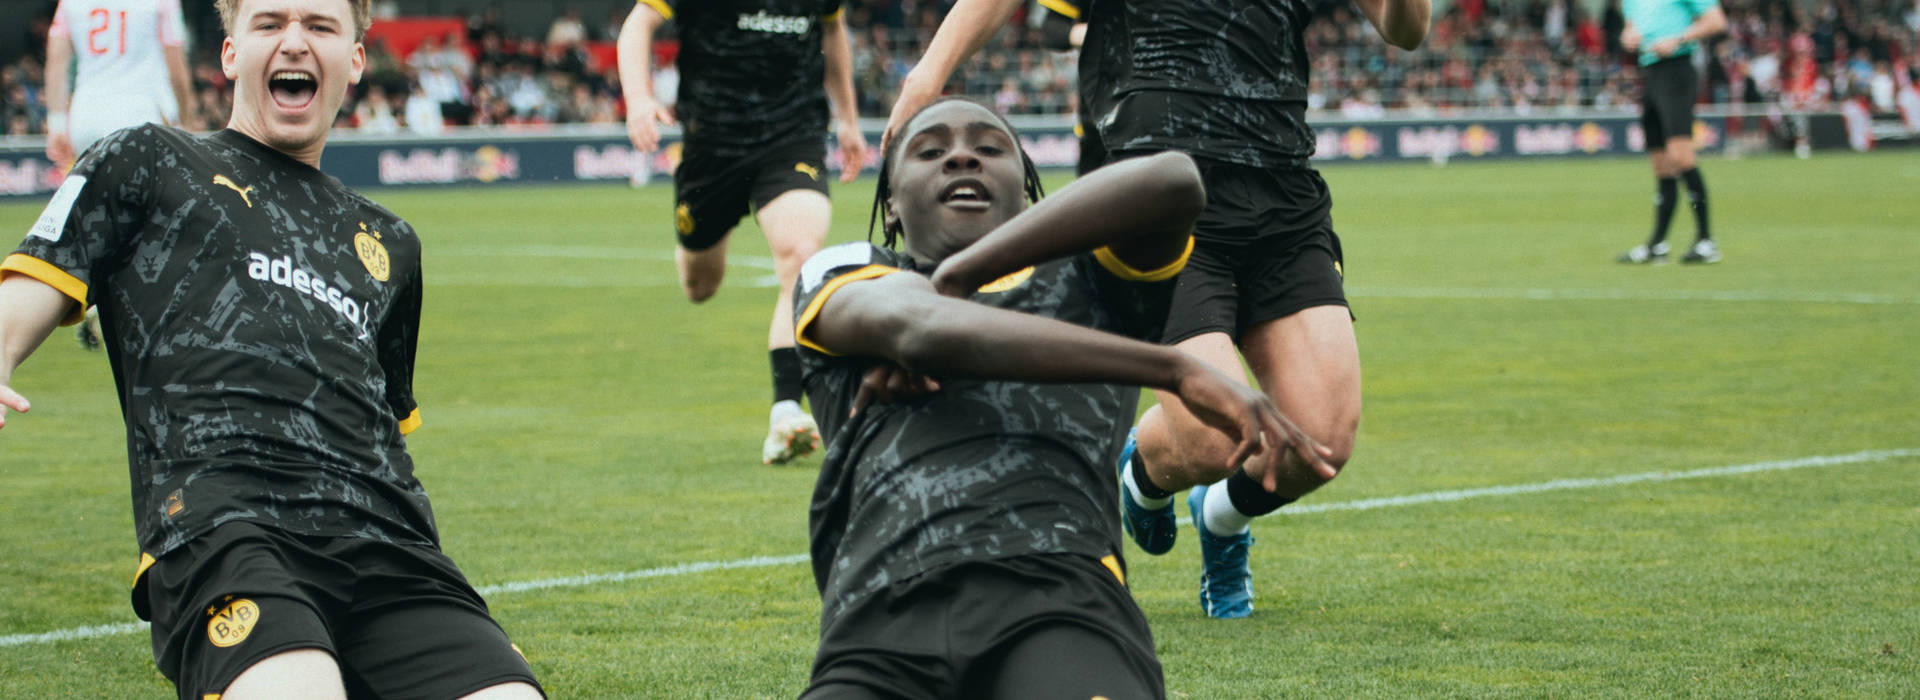 U17s storm into Championship Final with 3-2 win in Leipzig